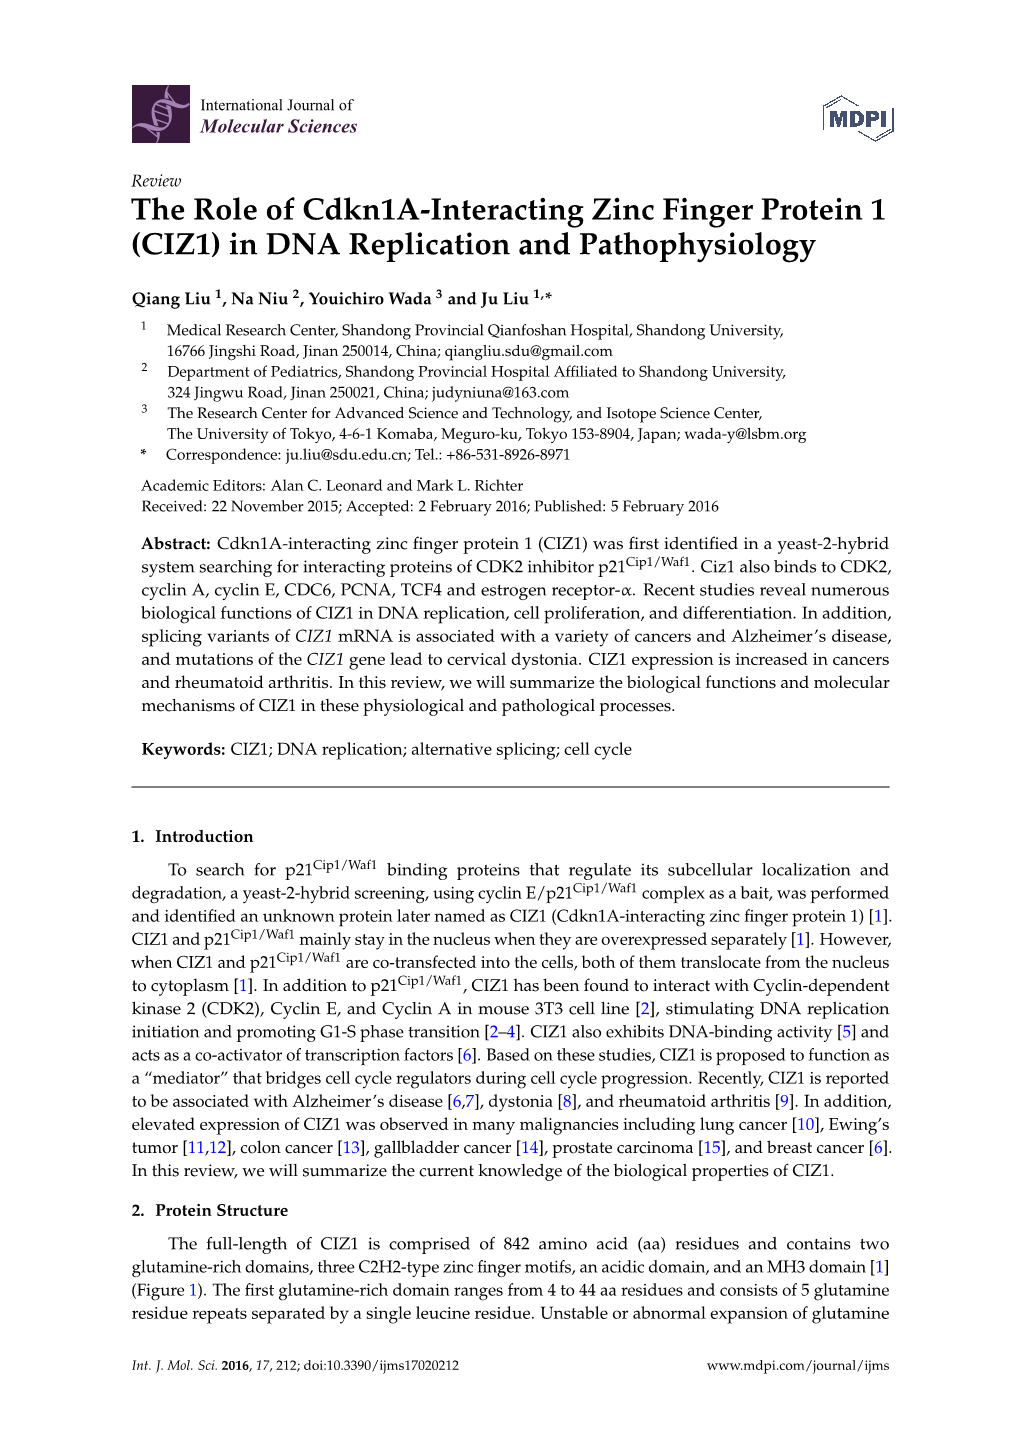 CIZ1) in DNA Replication and Pathophysiology